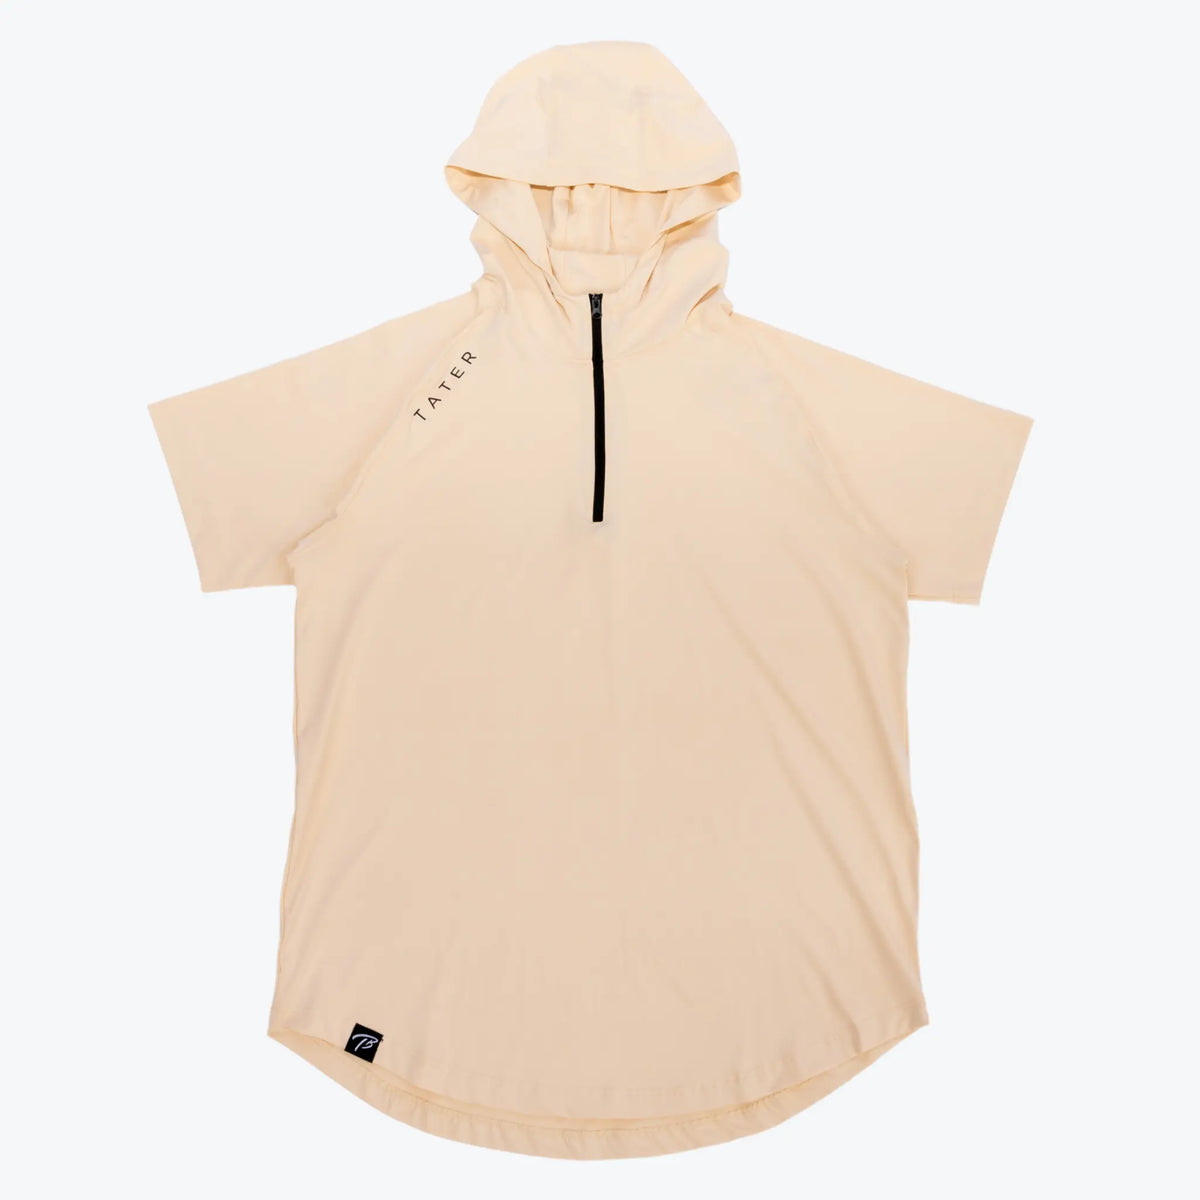 Picture of a short sleeve quarter zip baseball batting practice hoodie that has mosture wicking fabric and is tan color. The hoodie is placed on a white backdrop.